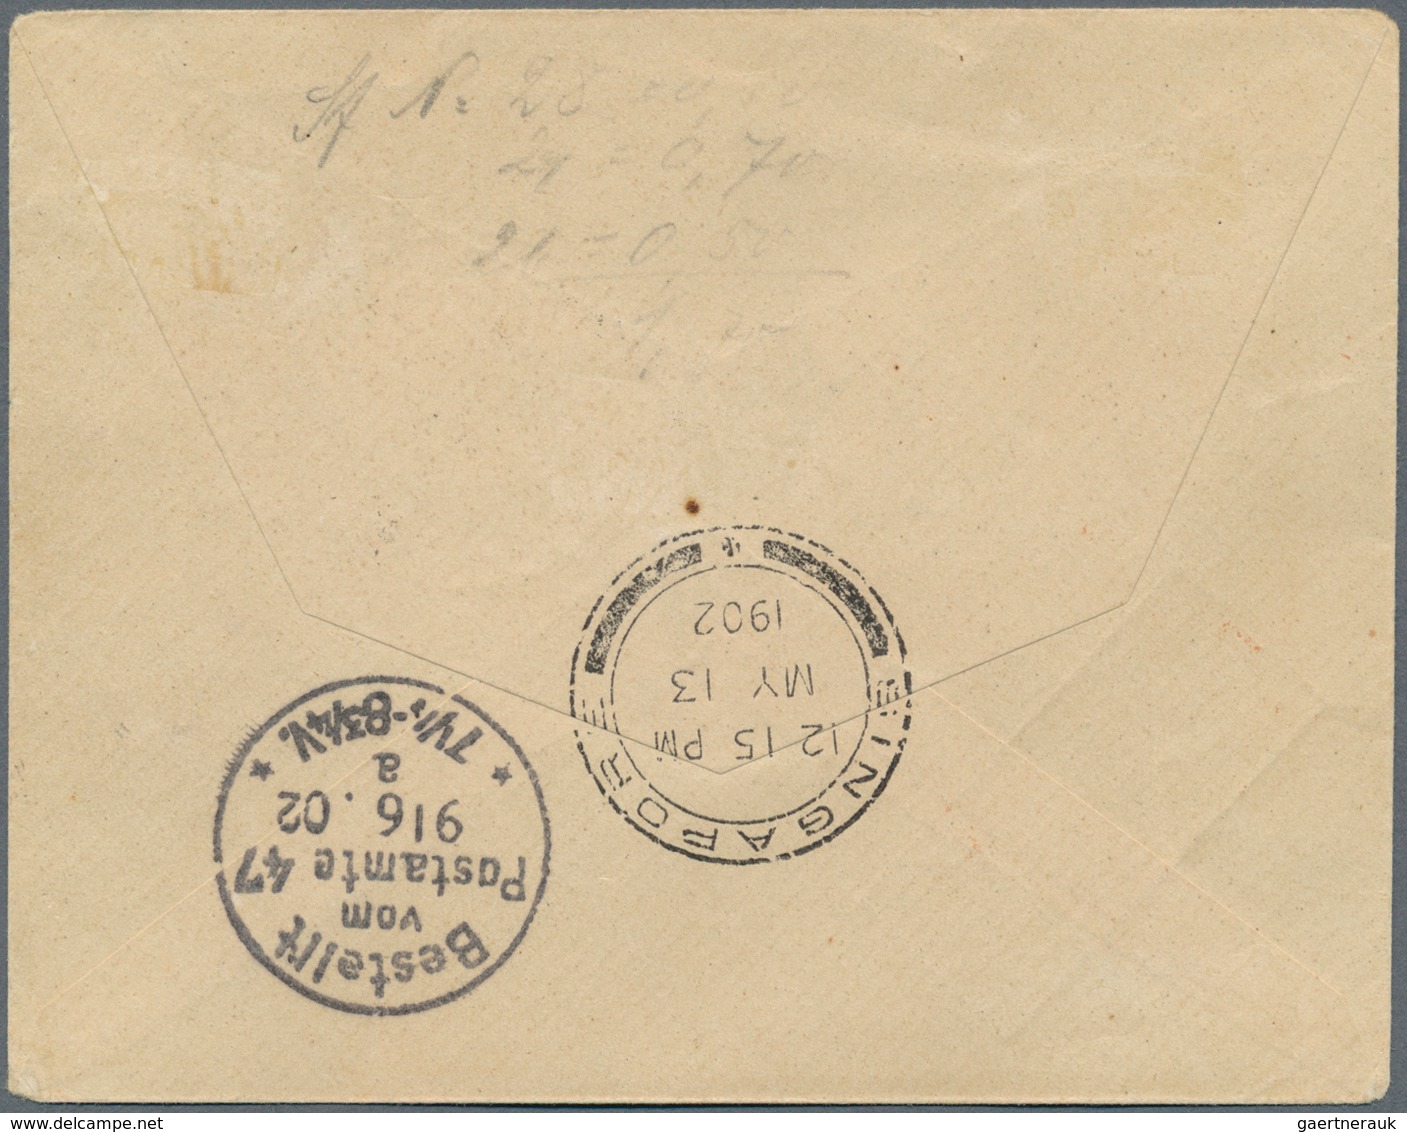 Malaiische Staaten - Johor: 1902 Registered Cover To Germany Franked By 1896-99 10c. Green & Black, - Johore